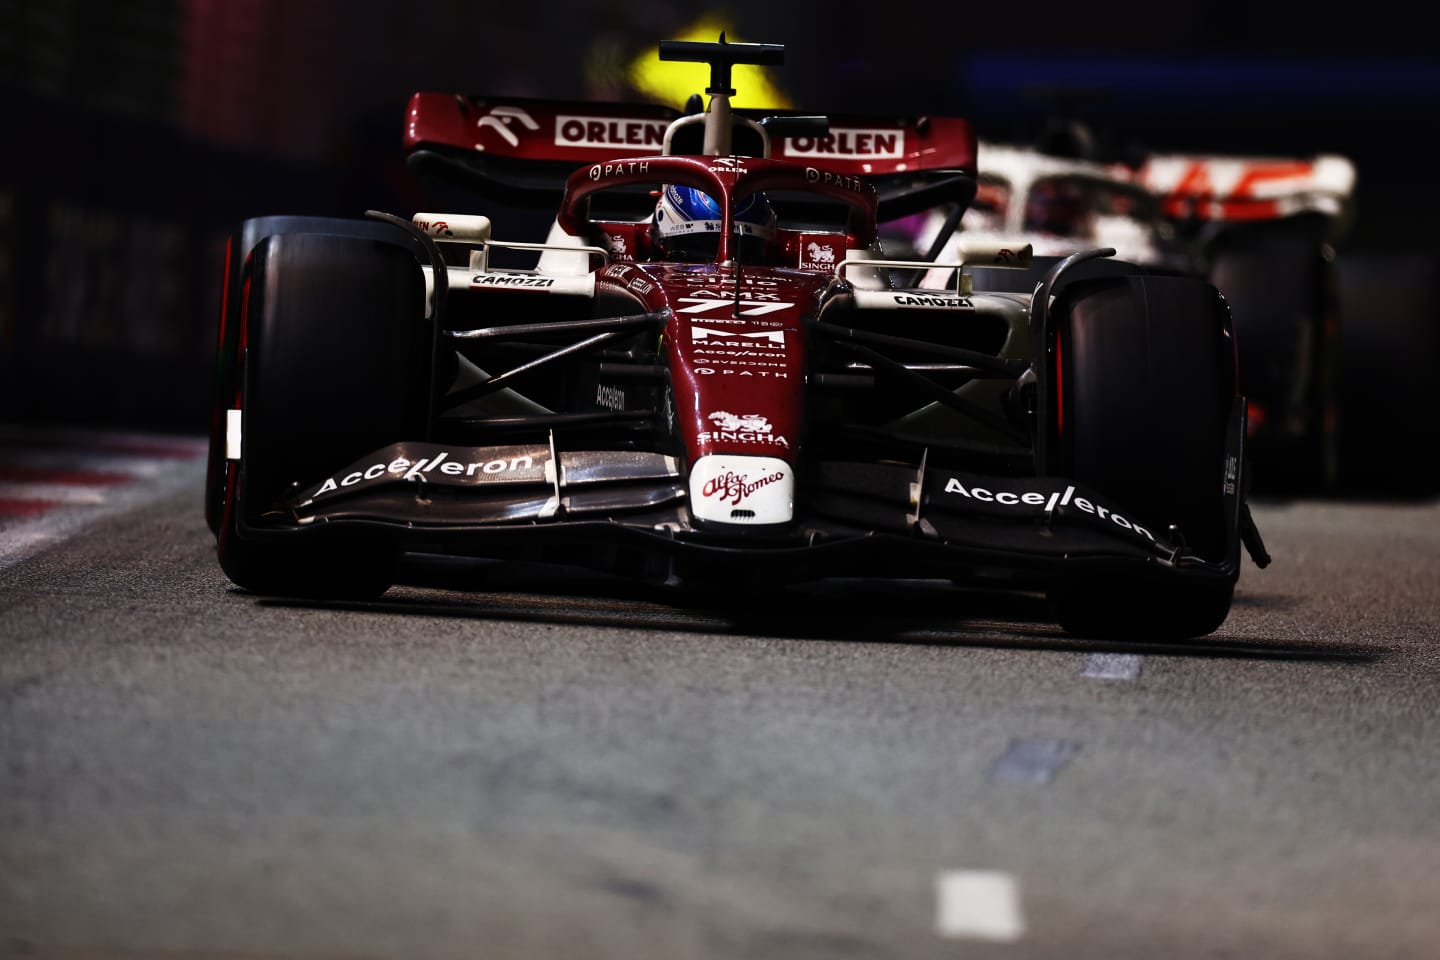 SINGAPORE, SINGAPORE - OCTOBER 02: Valtteri Bottas of Finland driving the (77) Alfa Romeo F1 C42 Ferrari on track during the F1 Grand Prix of Singapore at Marina Bay Street Circuit on October 02, 2022 in Singapore, Singapore. (Photo by Mark Thompson/Getty Images,)